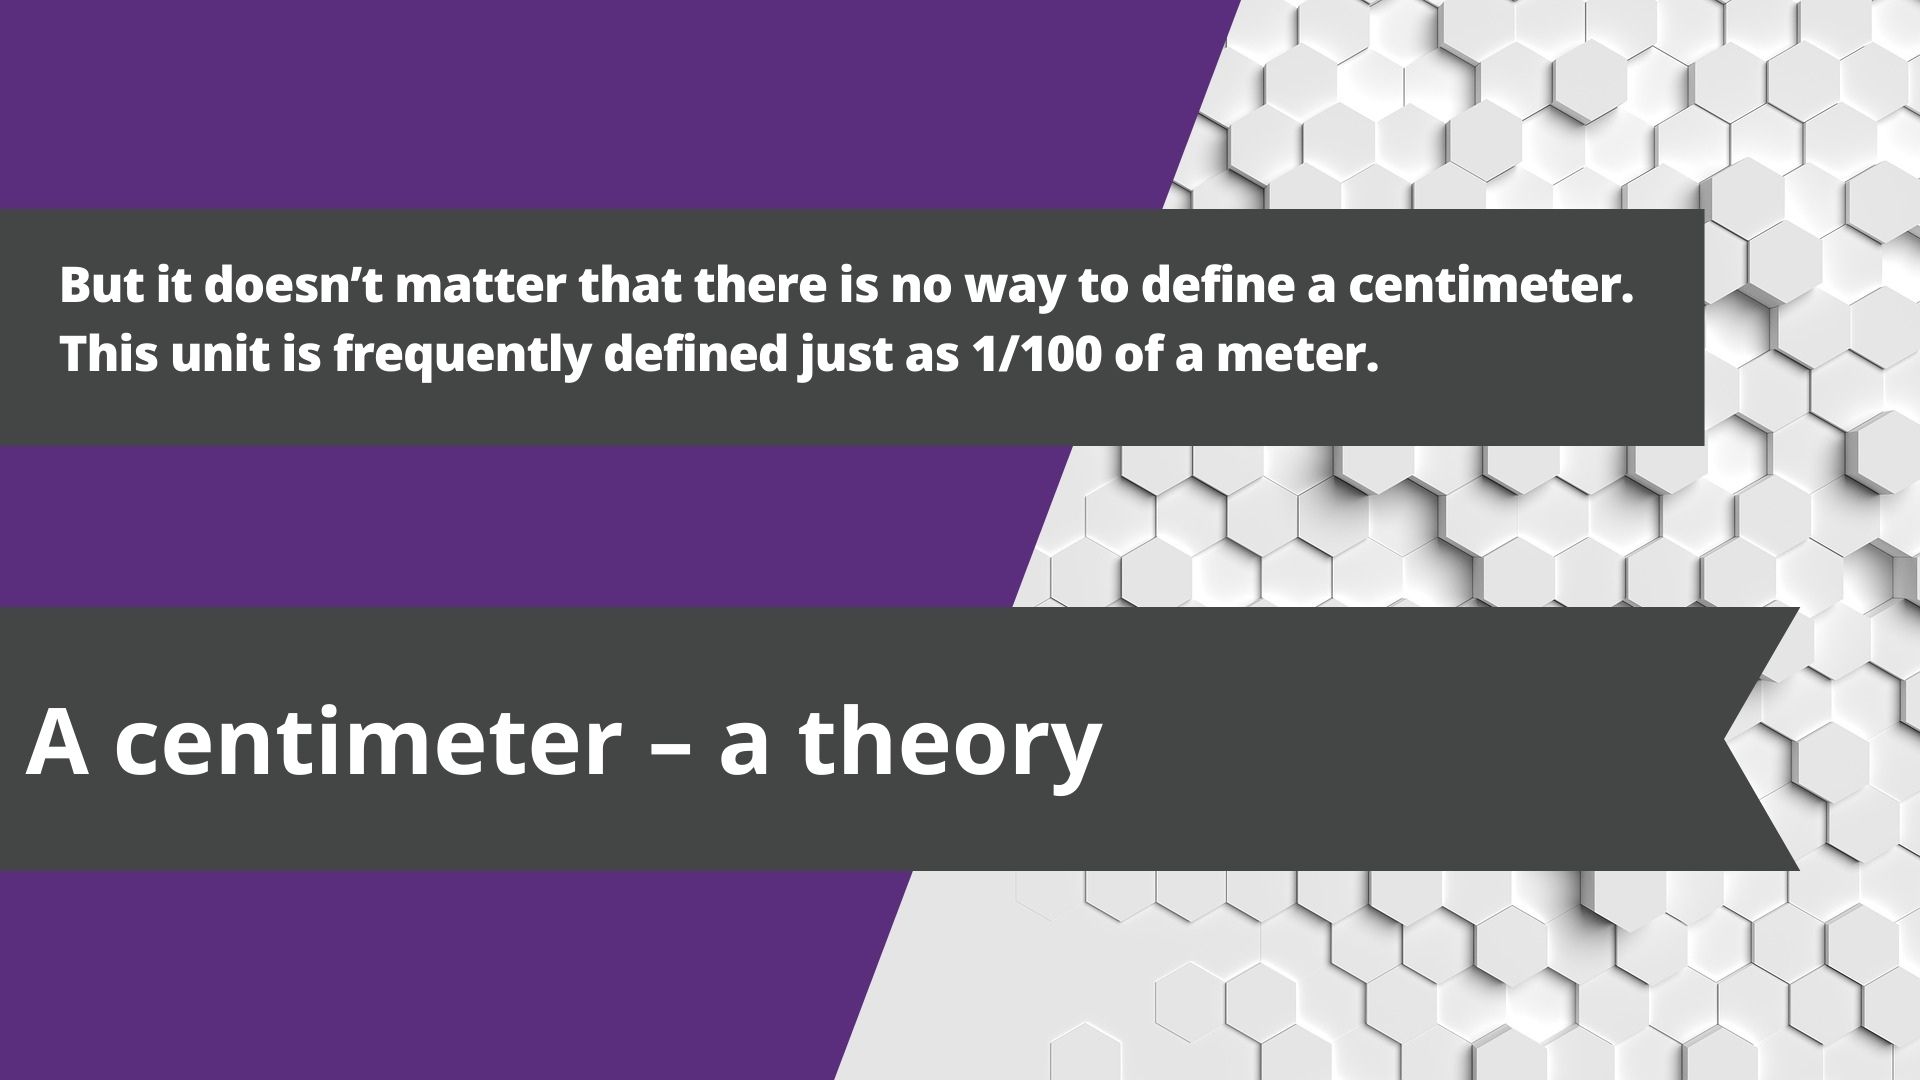 A centimeter – a theory